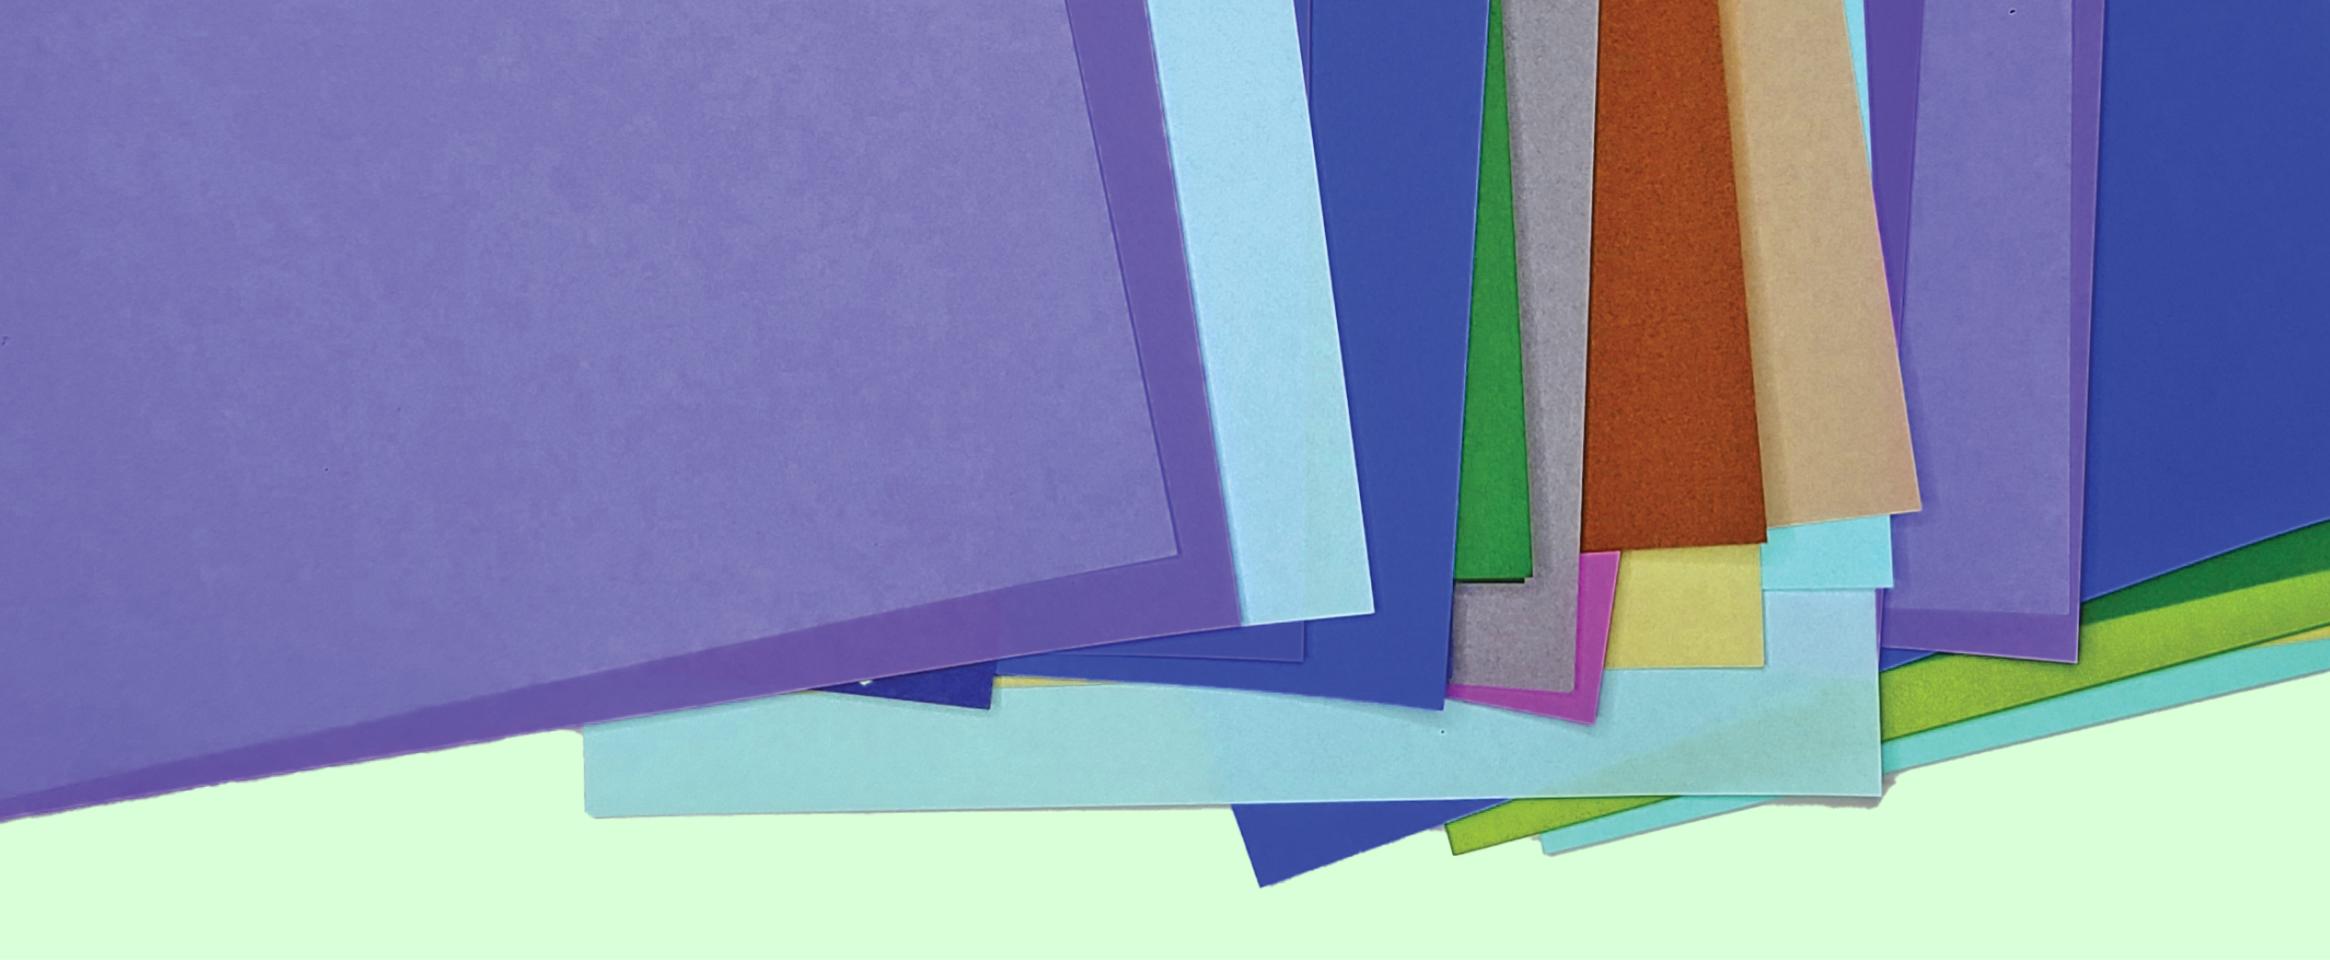 Illustration simulating origami paper overlapping in different colors.